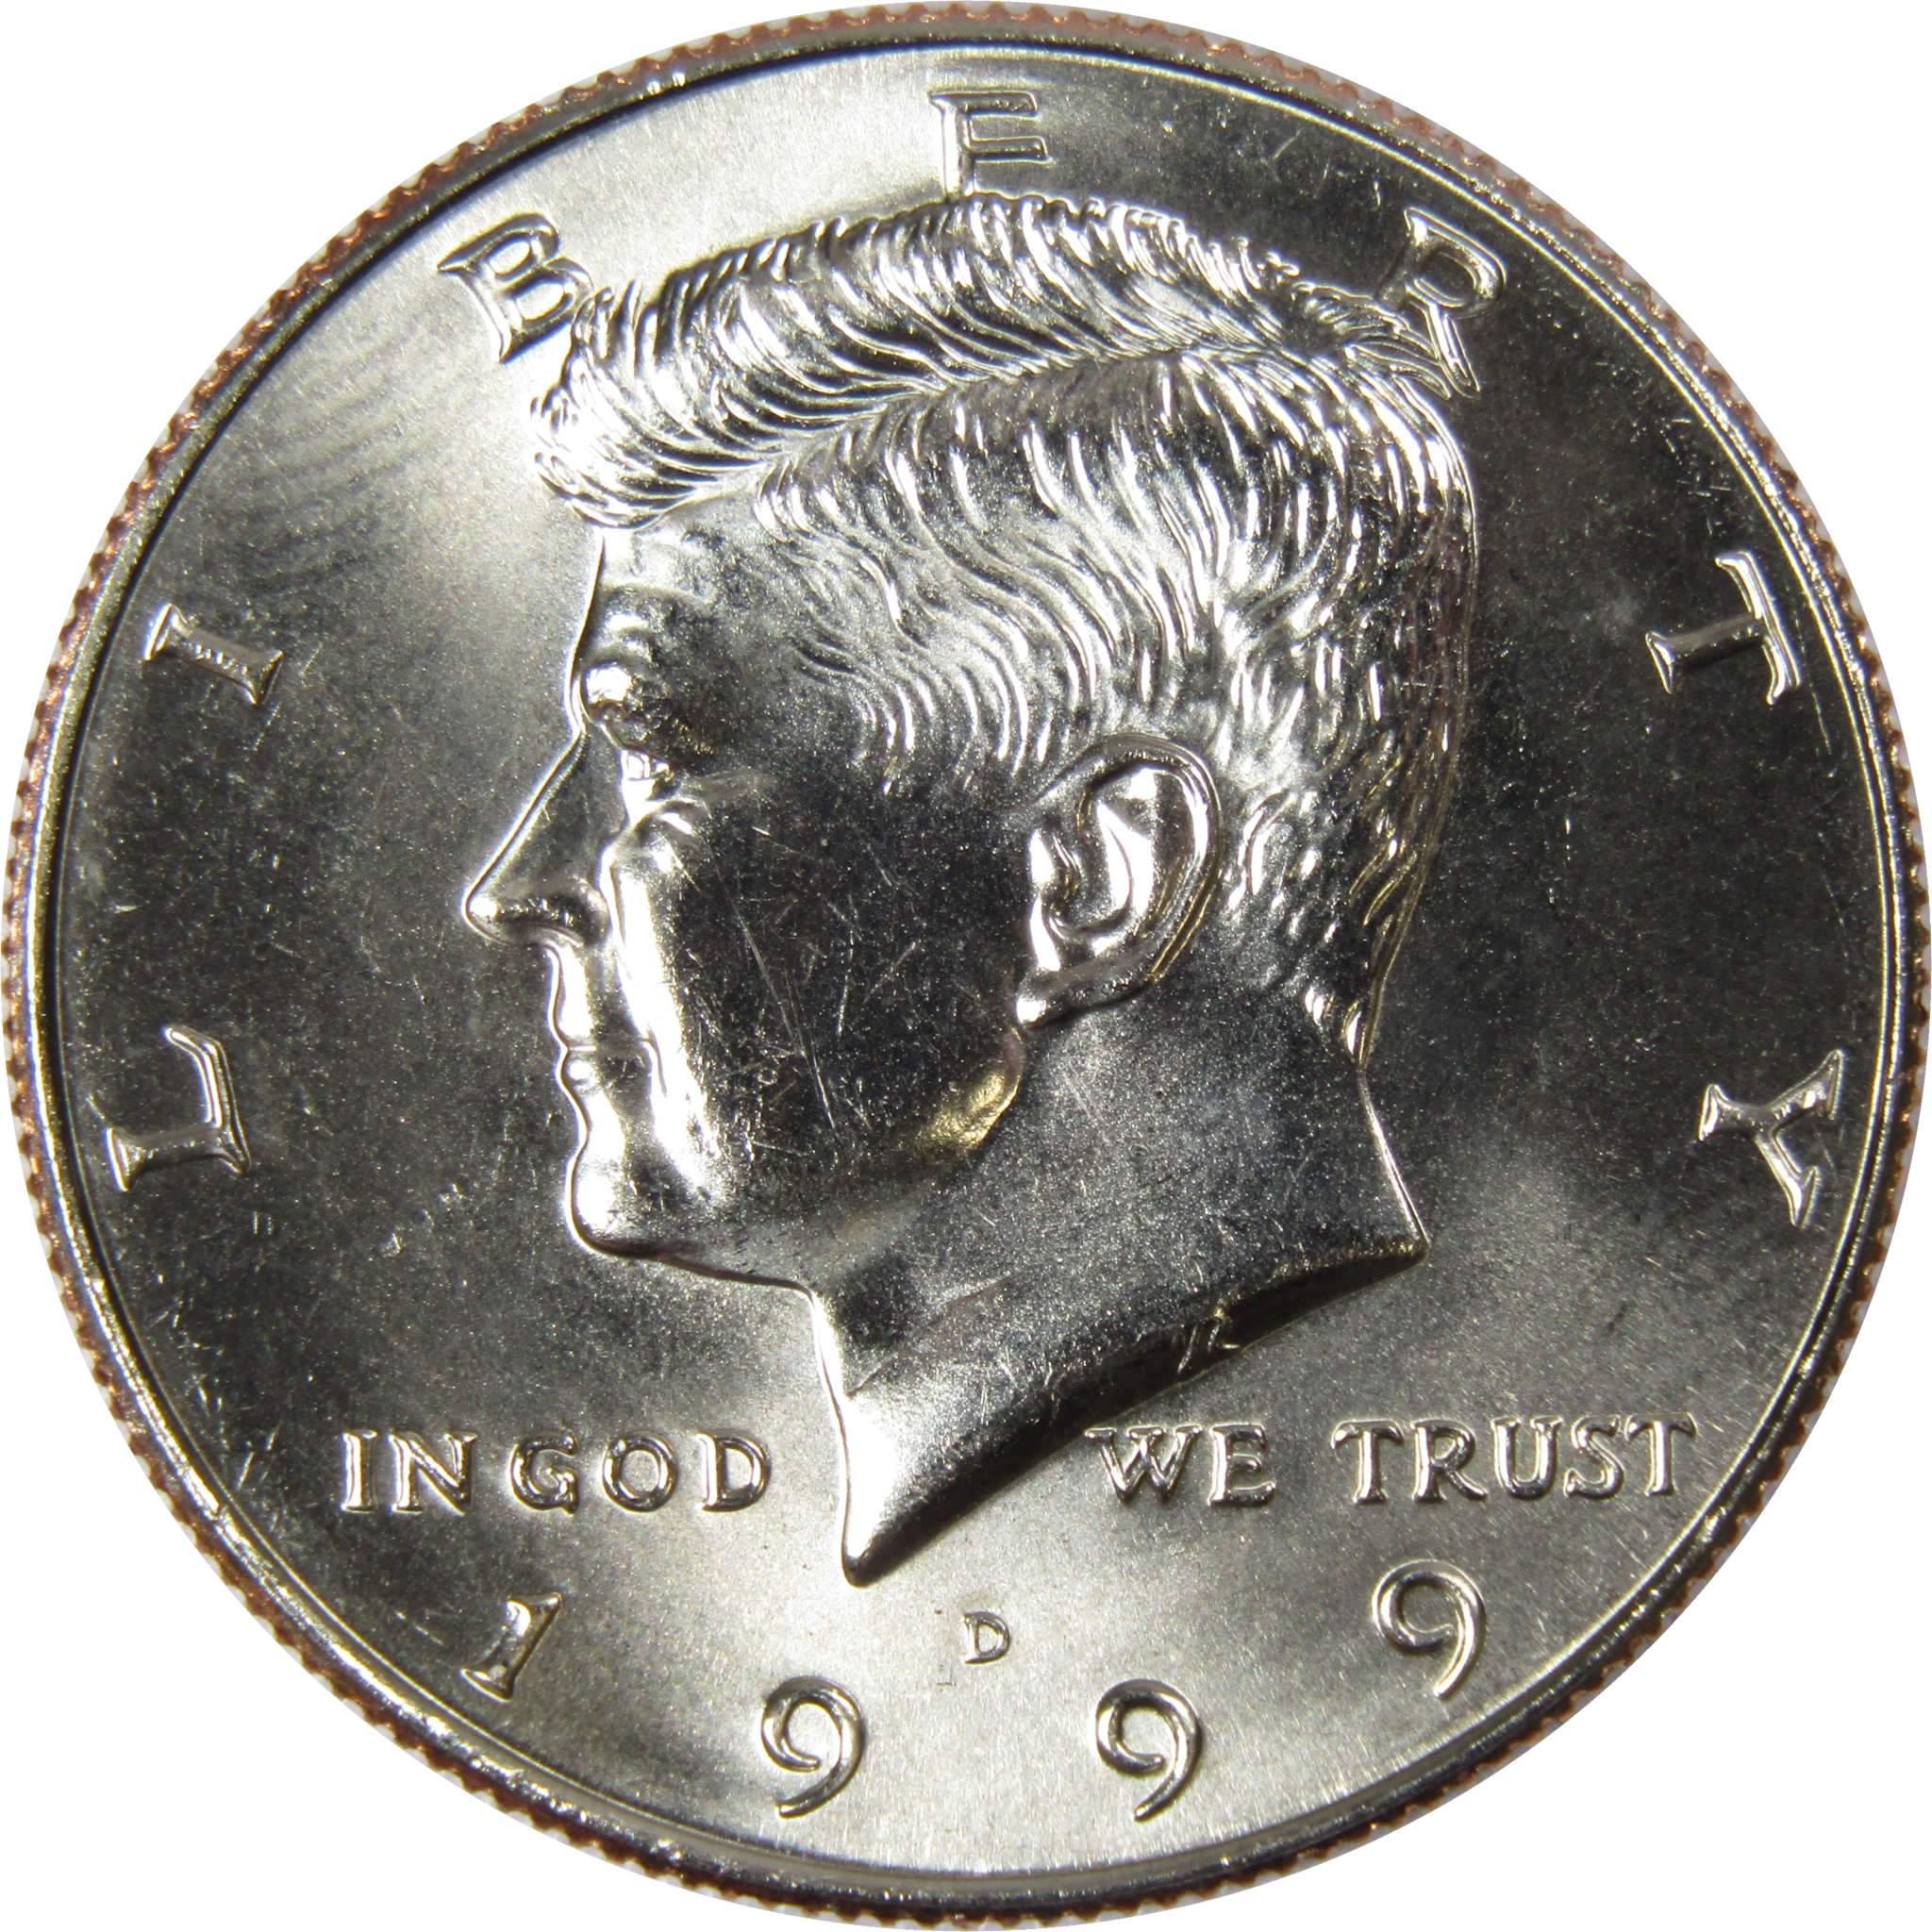 1999 D Kennedy Half Dollar BU Uncirculated Mint State 50c US Coin Collectible